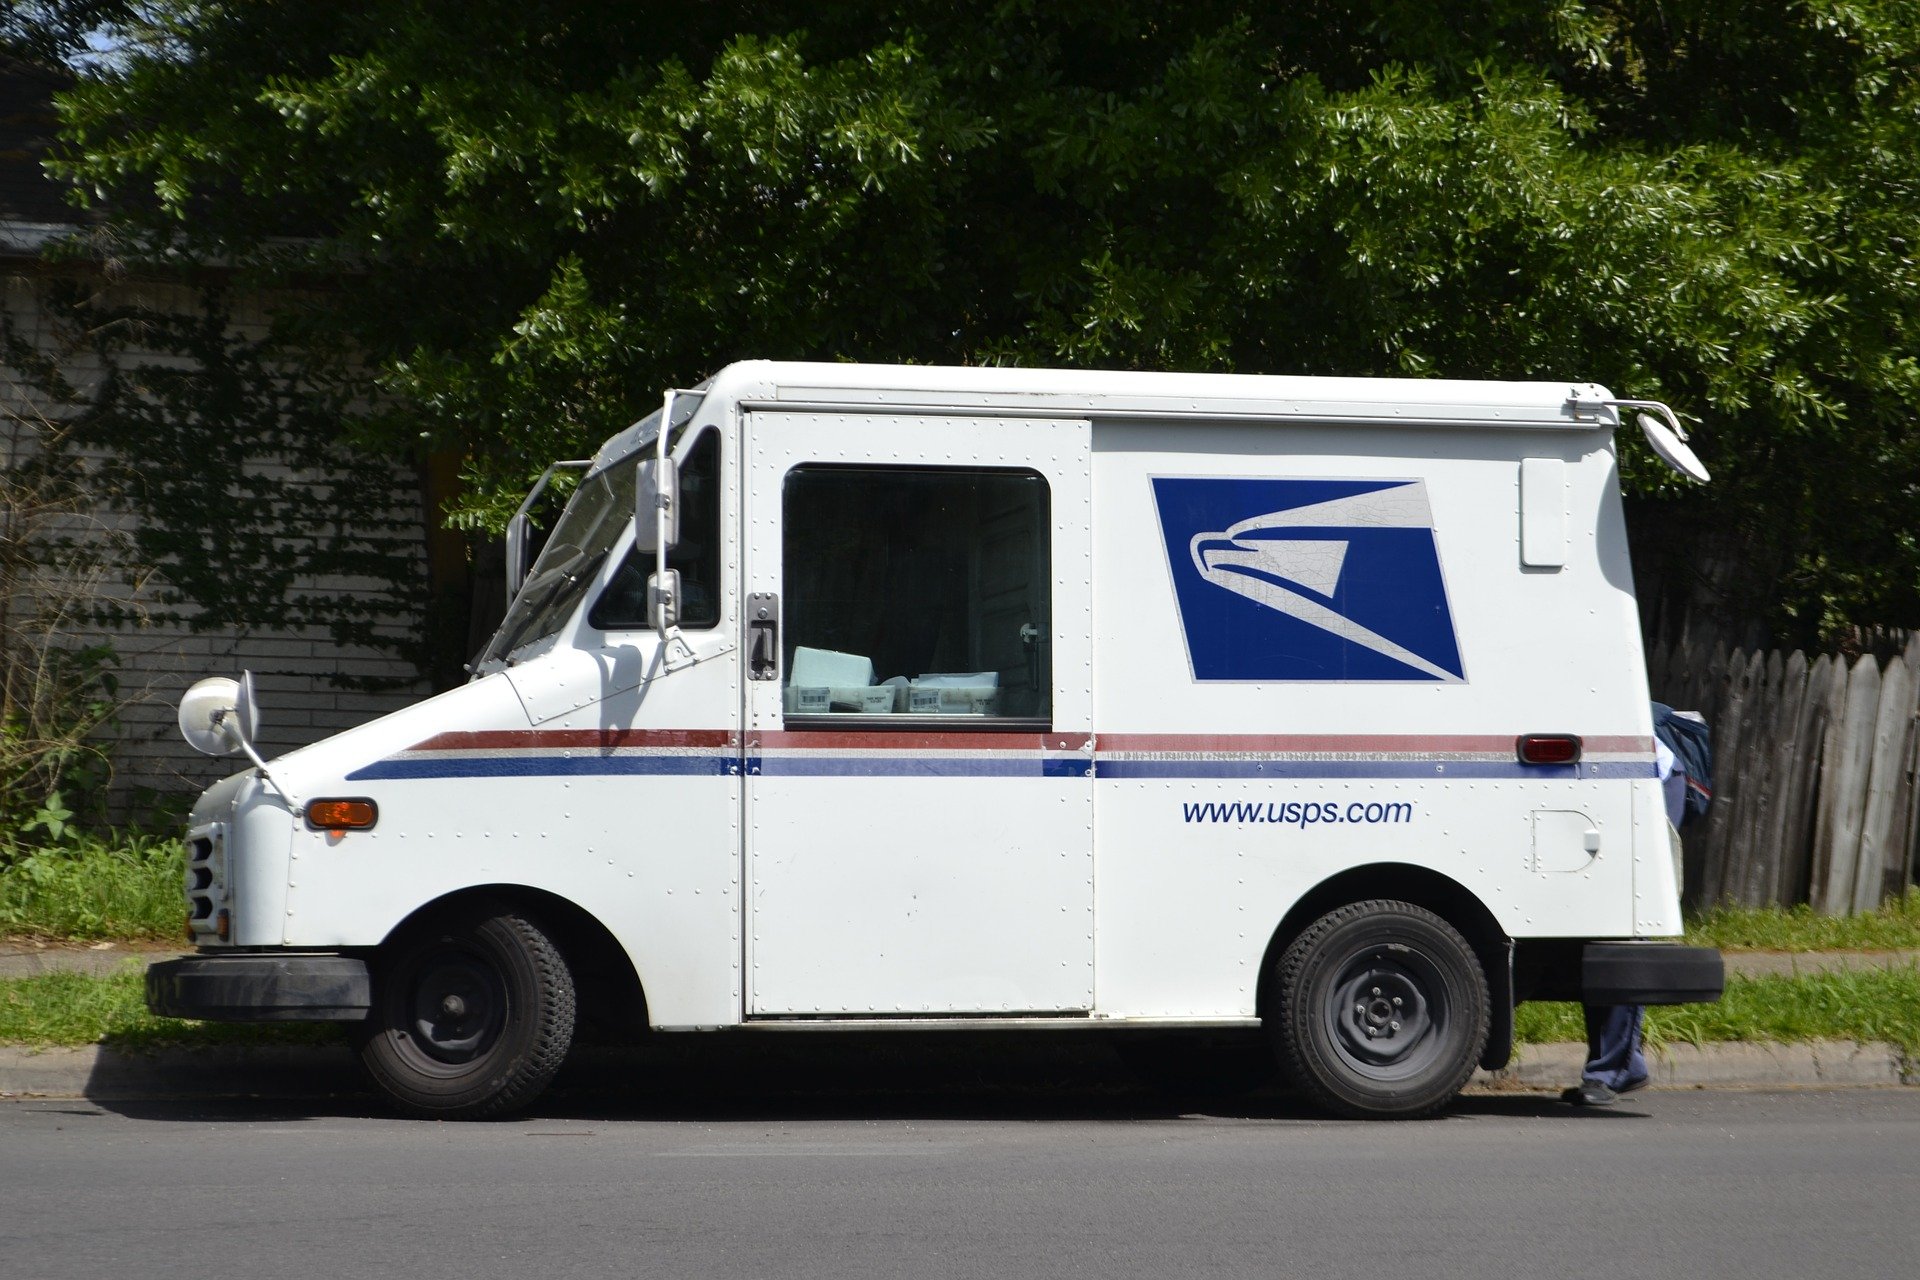 A mailman getting mail out of the back of his truck. | Source: Pixabay.